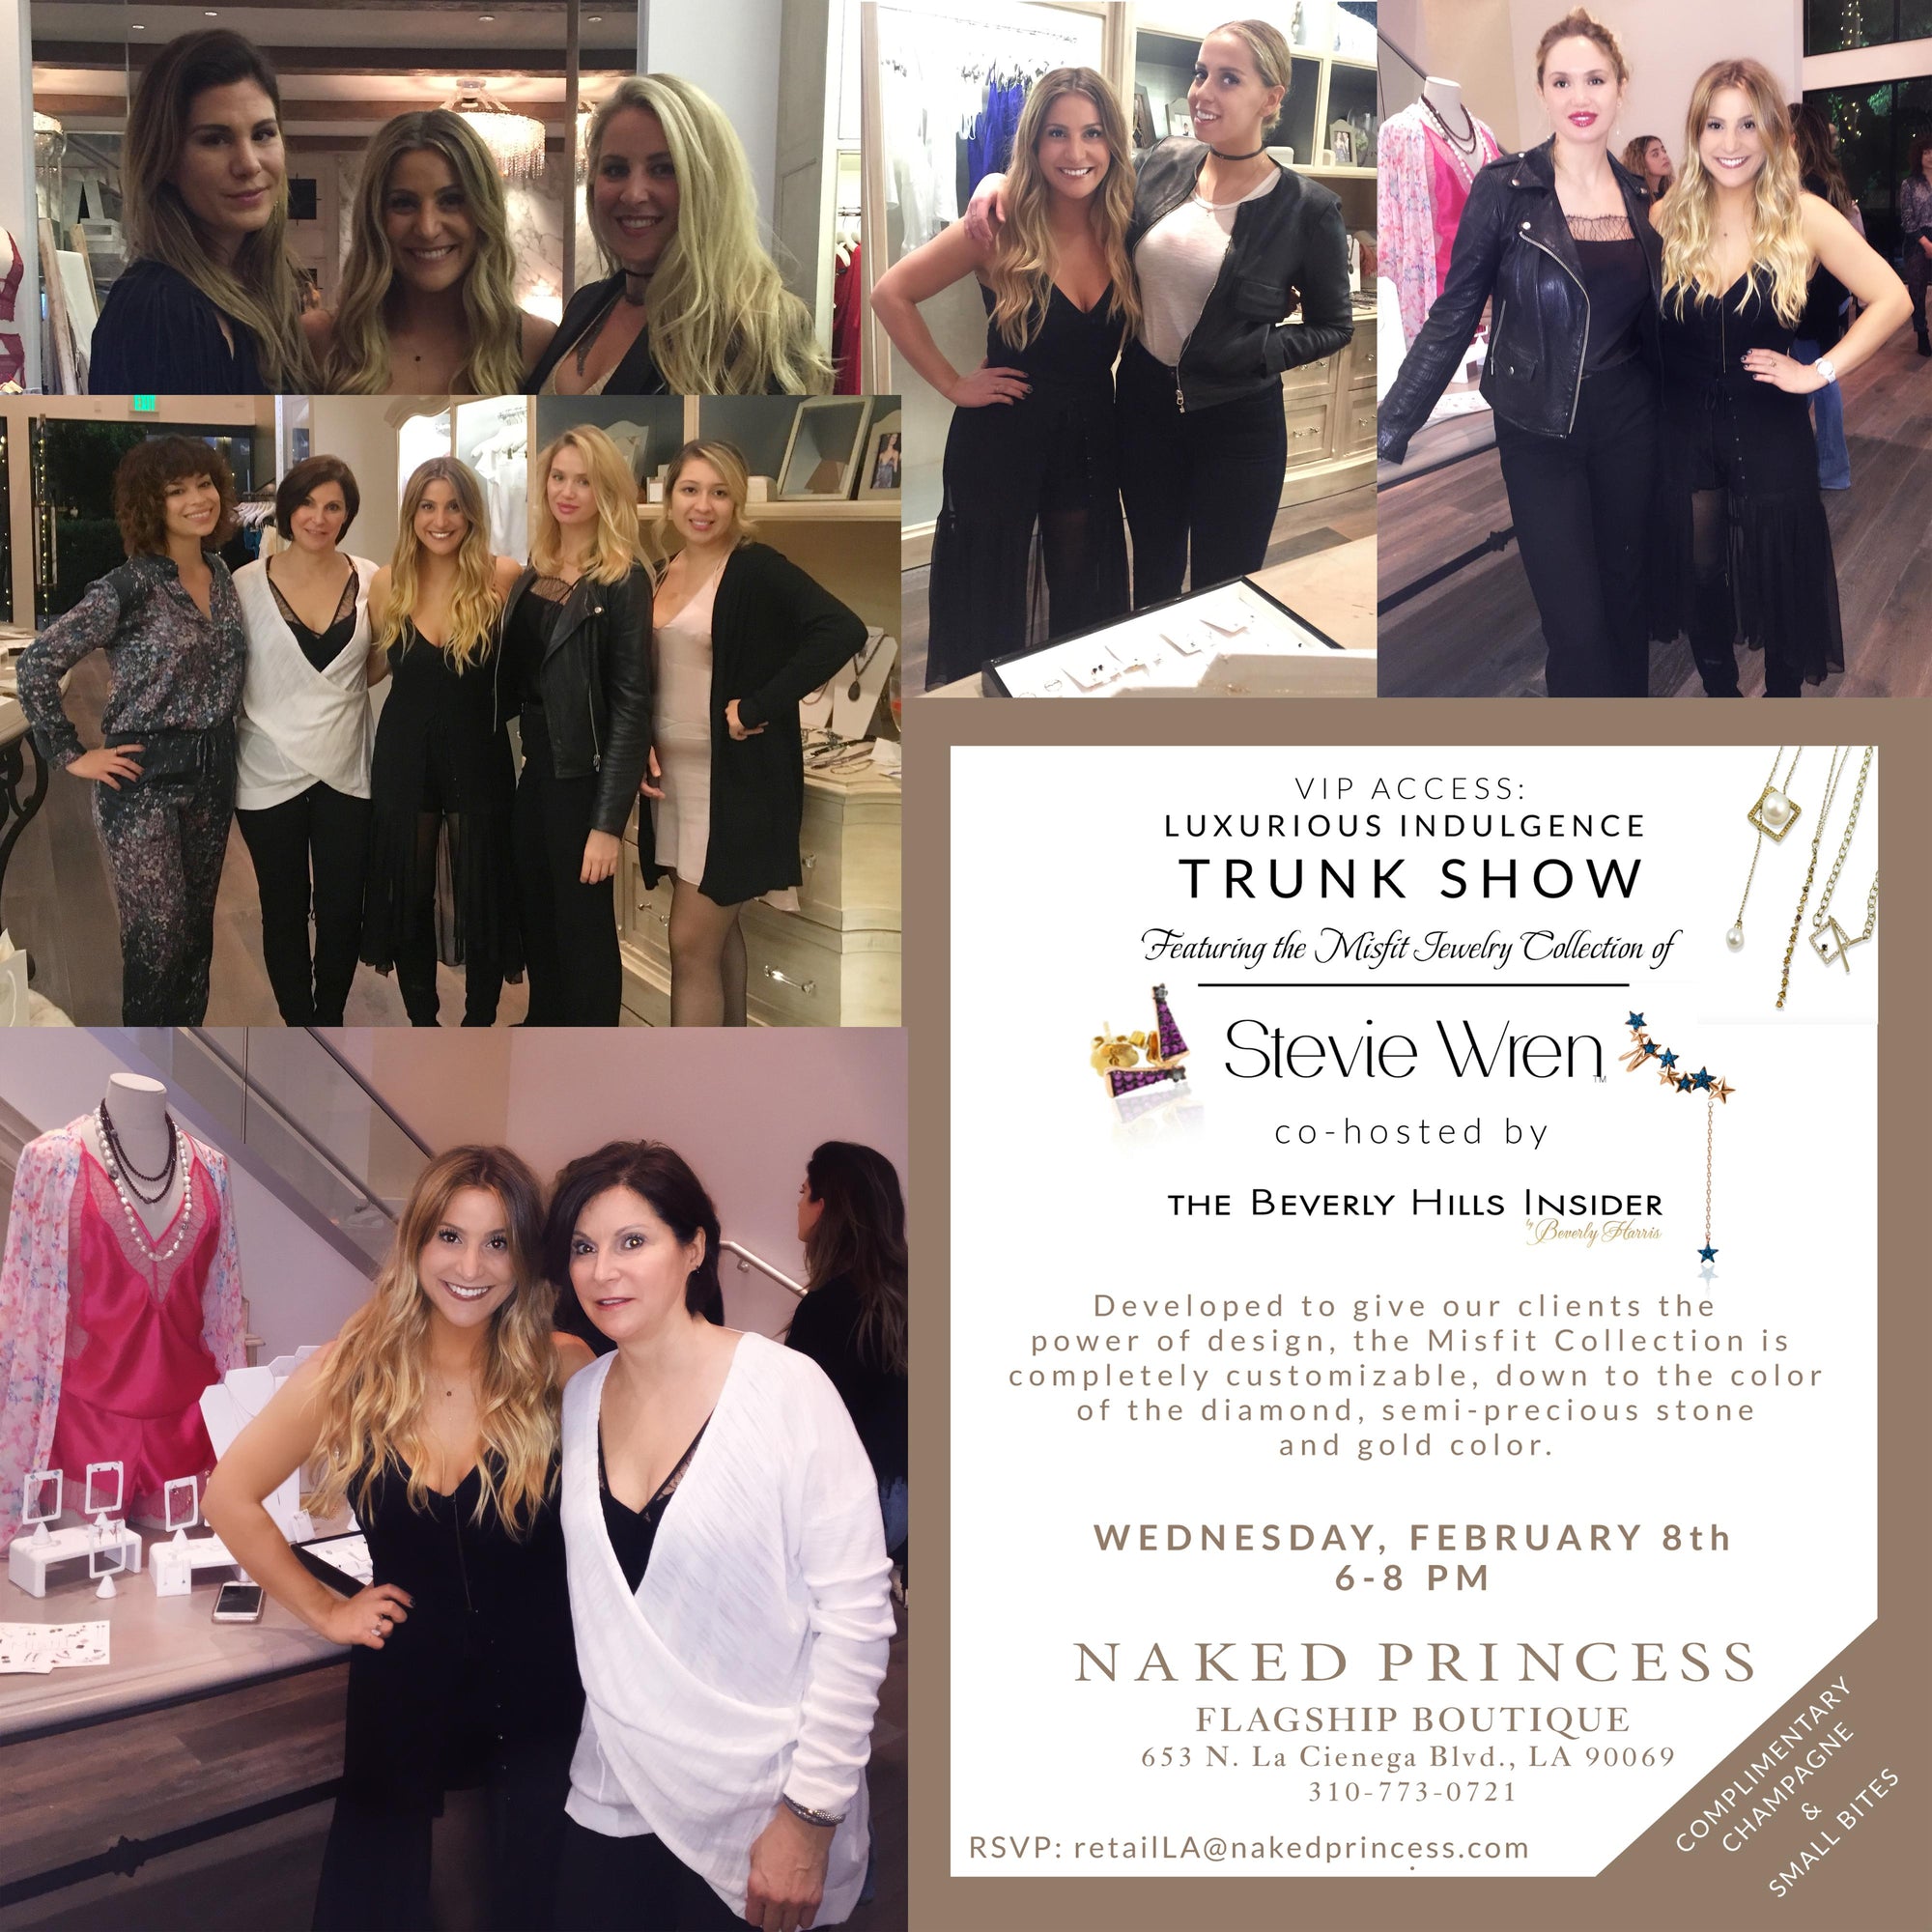 VIP Trunk Show at Naked Princess in L.A.